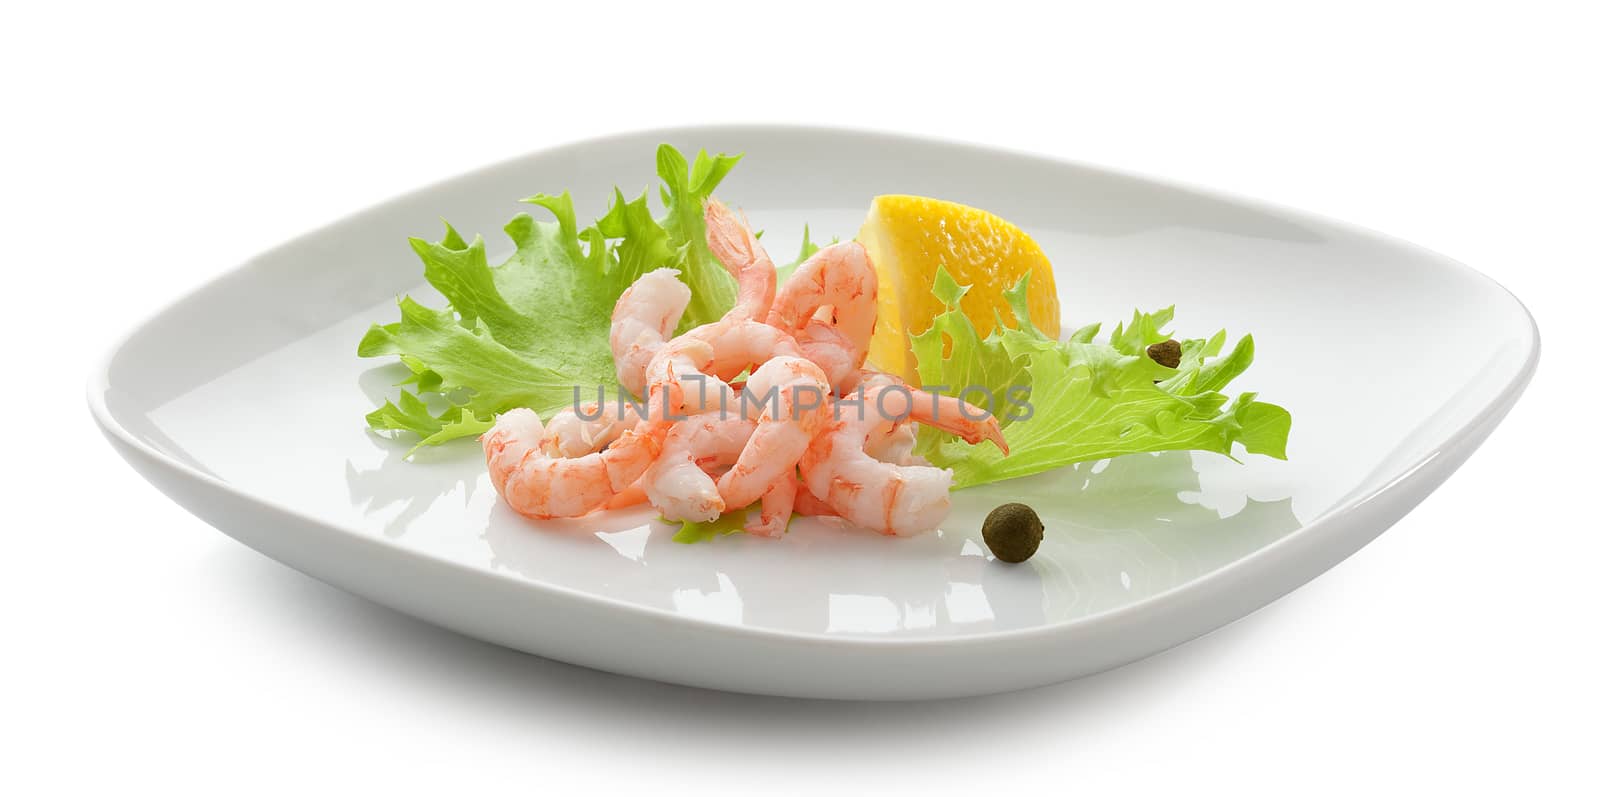 Cleanesed shrimp's tails with fresh lettuce and lemon on the white plate